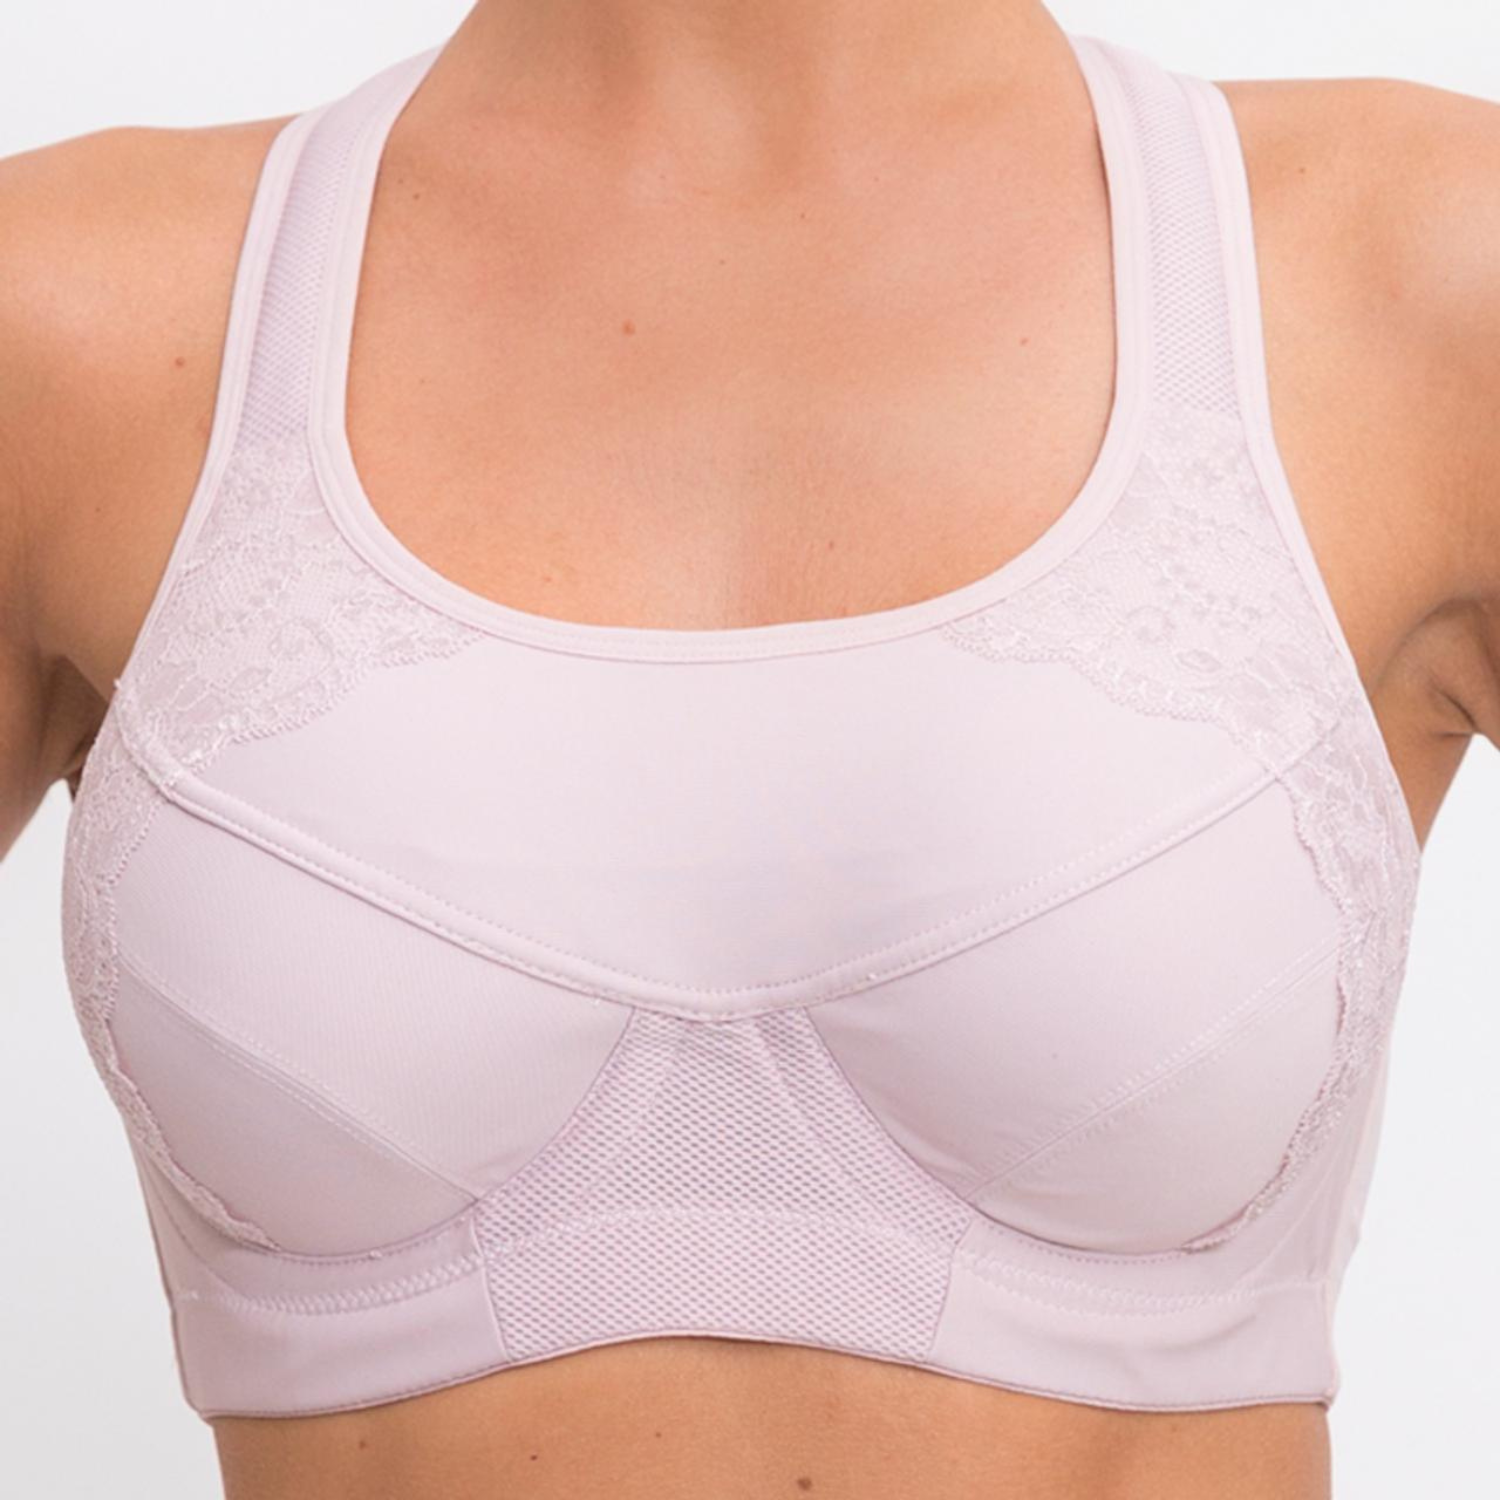 Review of the Q-Linn Barcelona Underwired Sports Bra 